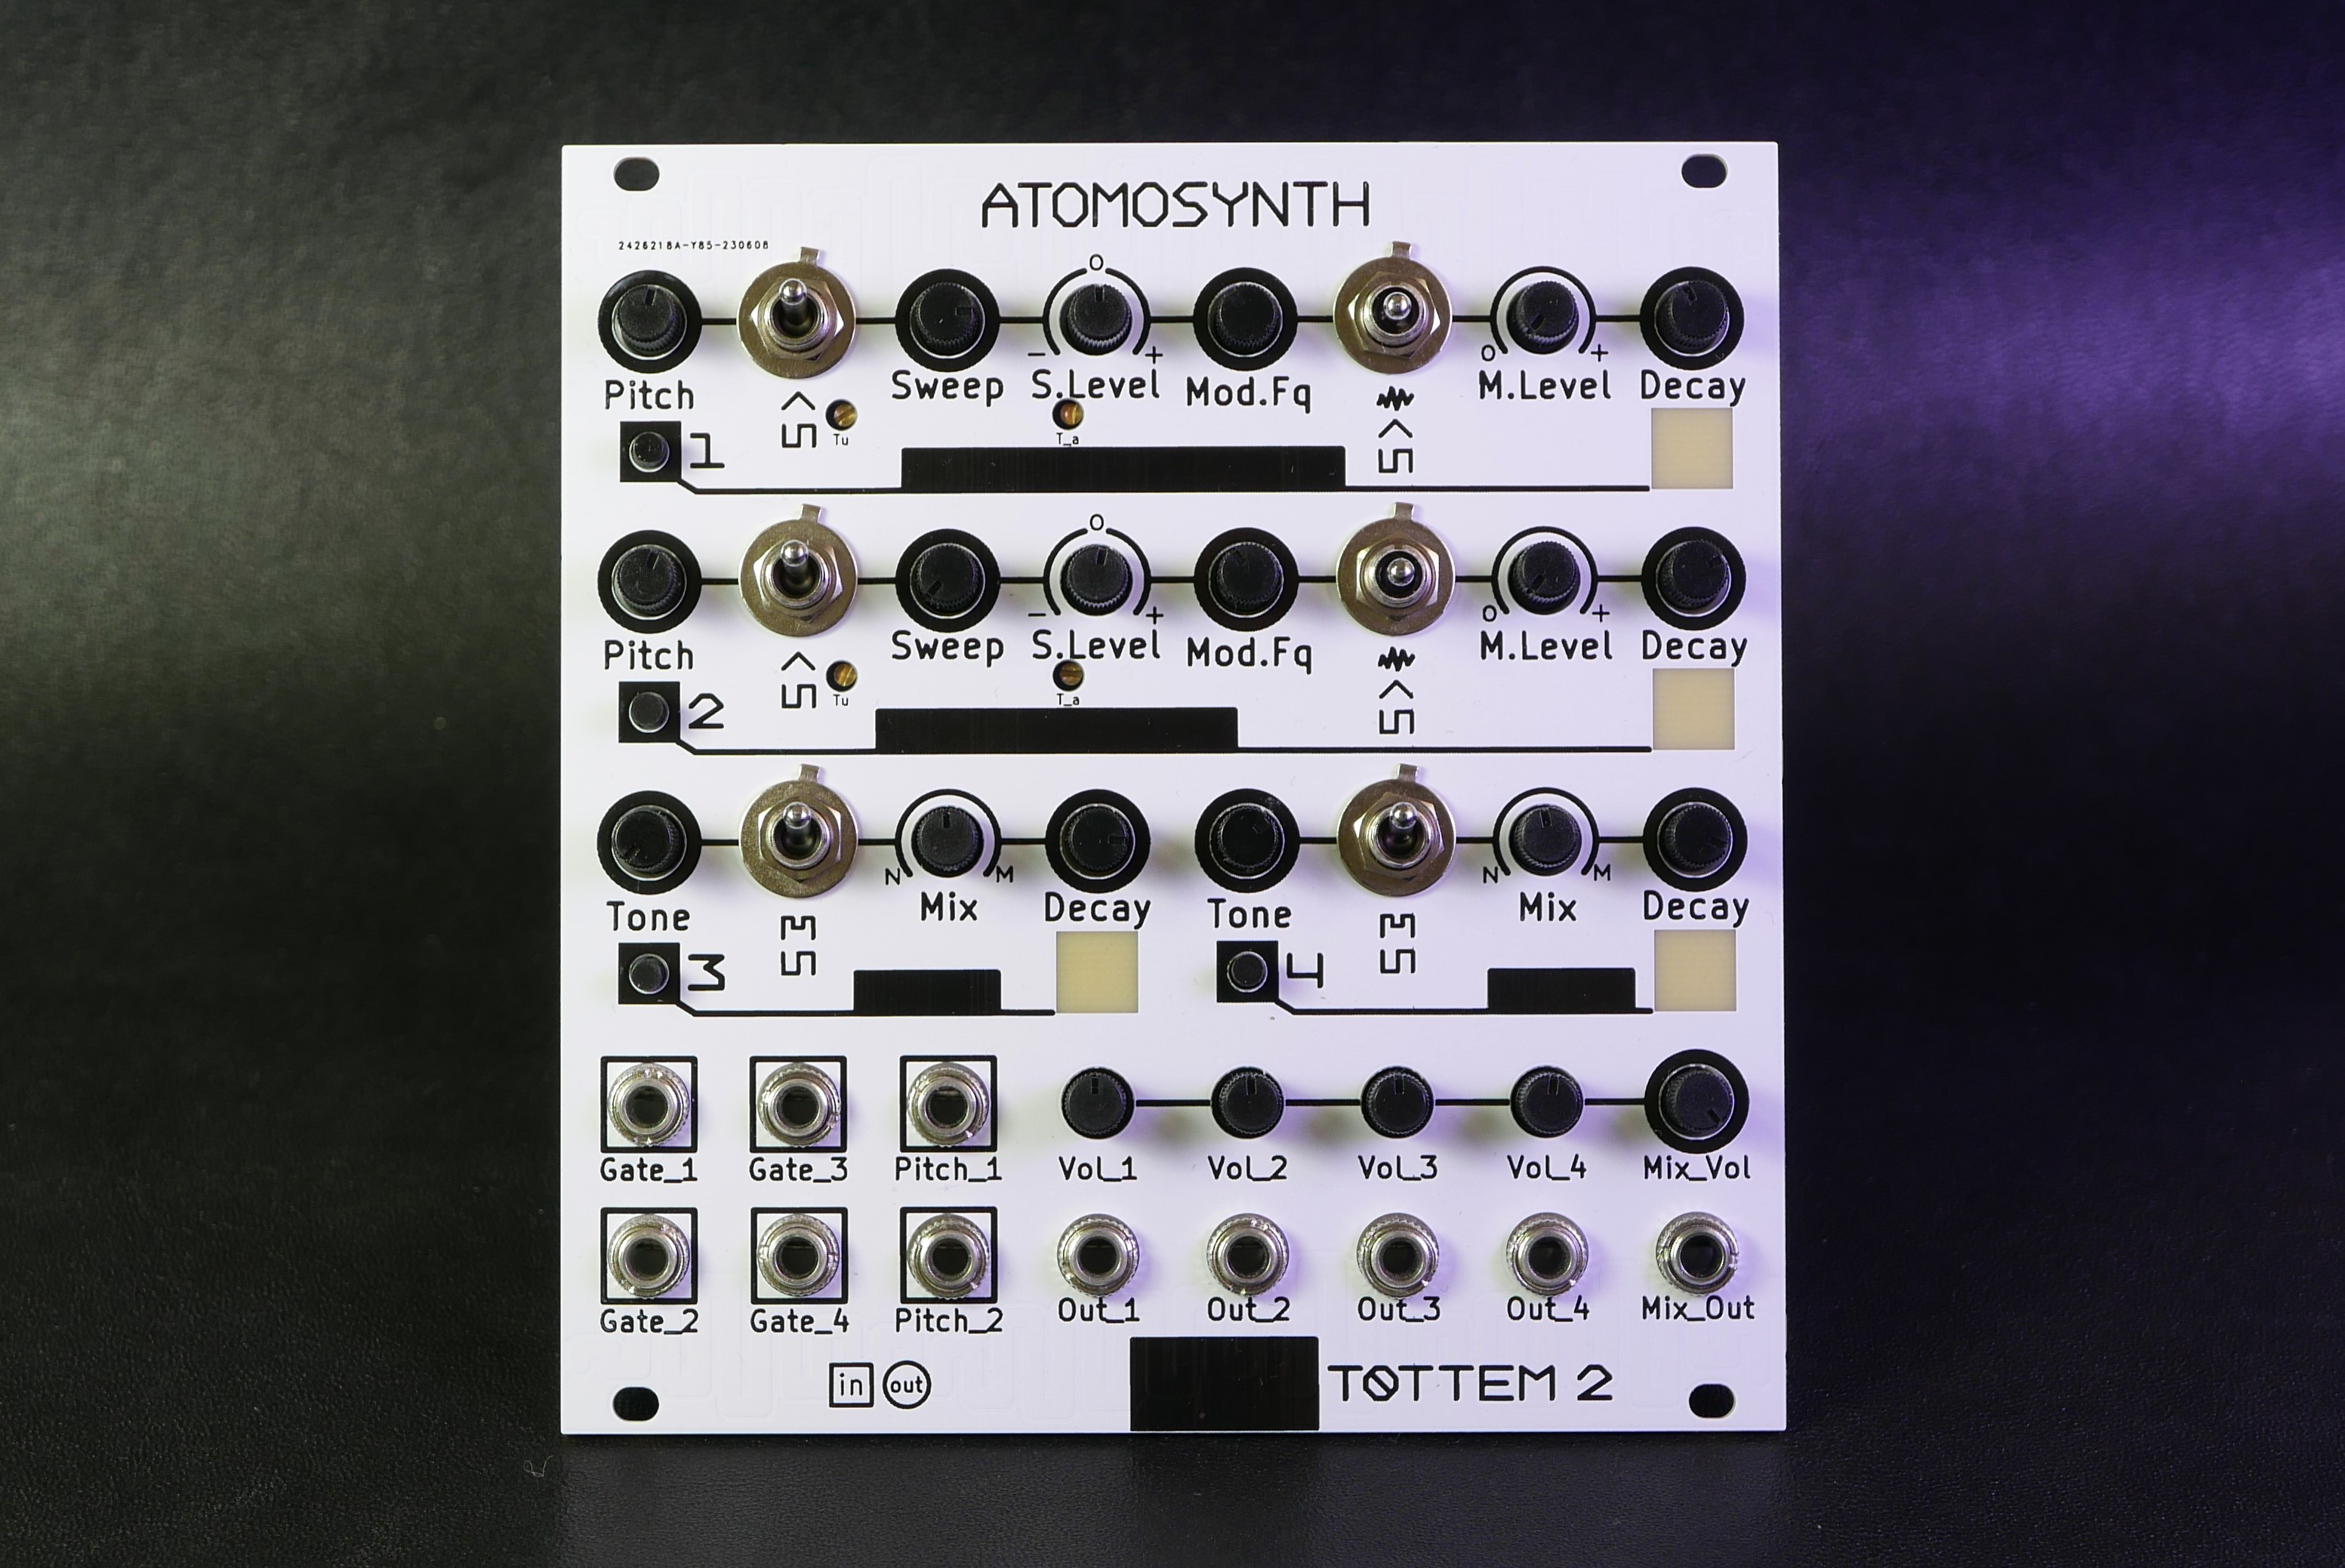 atomosynth tottem picture